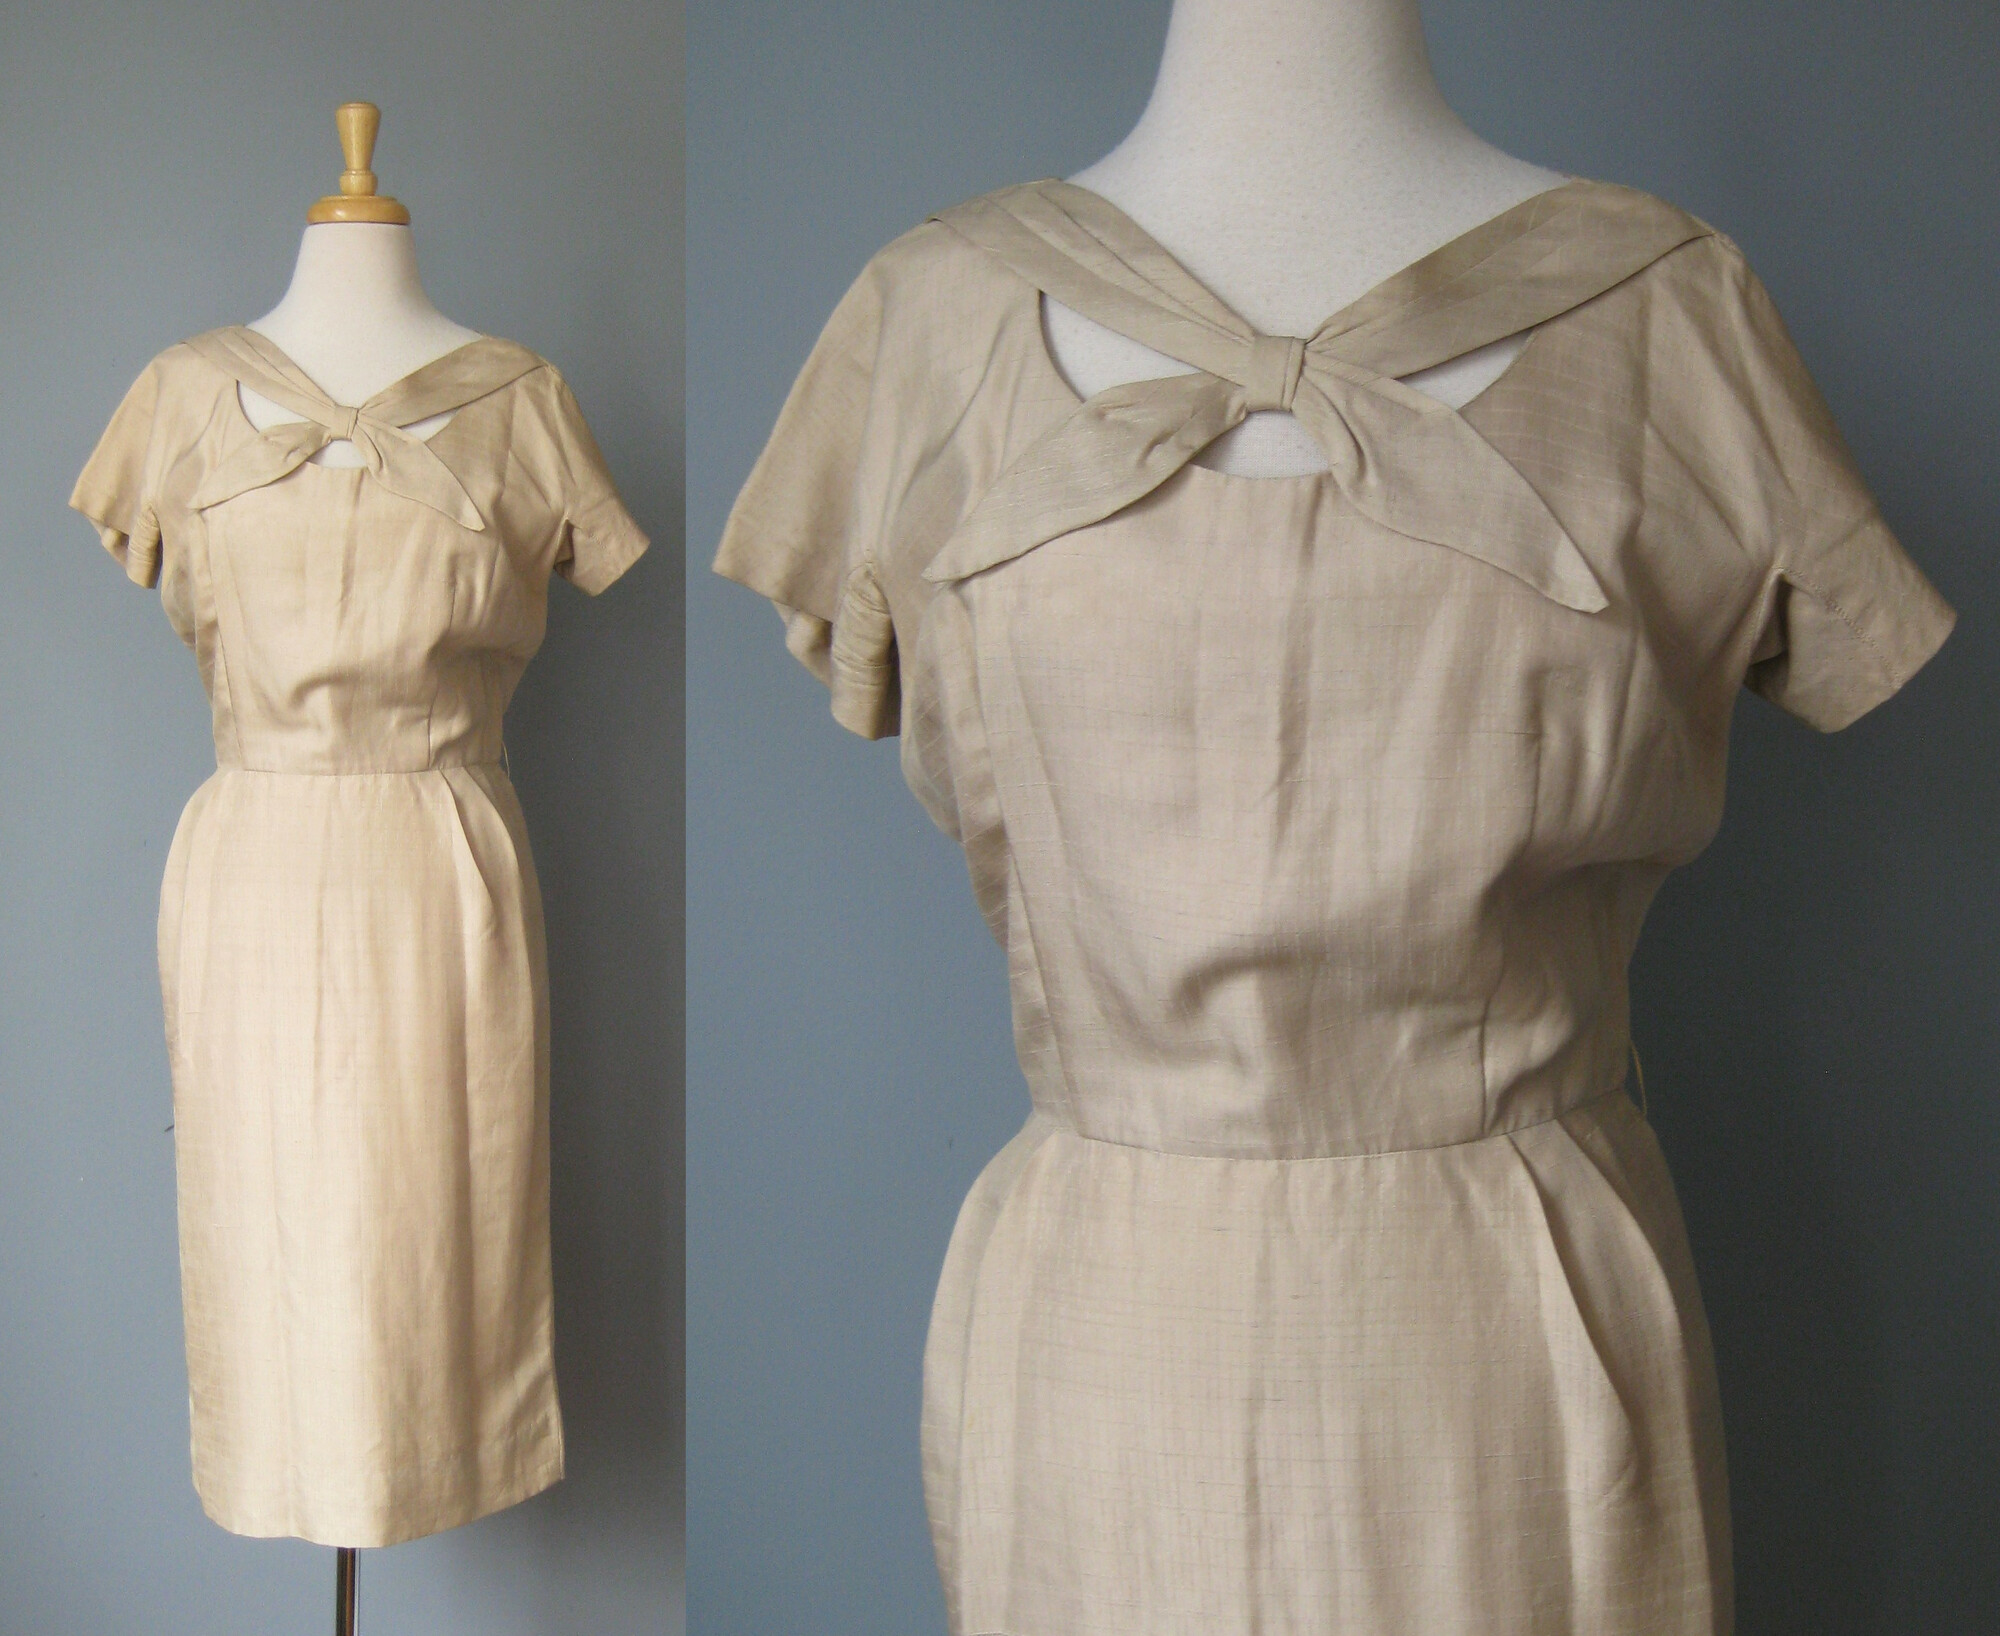 Very Smart, this slim fitting beige dress has a complex open neckline and a little flare of a train built into the back.

This dress is made of slubby silk or faux silk shantung, in great condition. It is unlined and has a metal zipper in the center back. No labels. The sleeves are cut on short sleeves.

excellent condition but with a few spots as shown in the photos, mostly in the back.

Here are the flat measurements, please double where appropriate:

Armpit to Armpit:  18.5
Waist: 14 1/2
Hips: 19 1/4
Overall length: 41

Thanks for looking
#42825